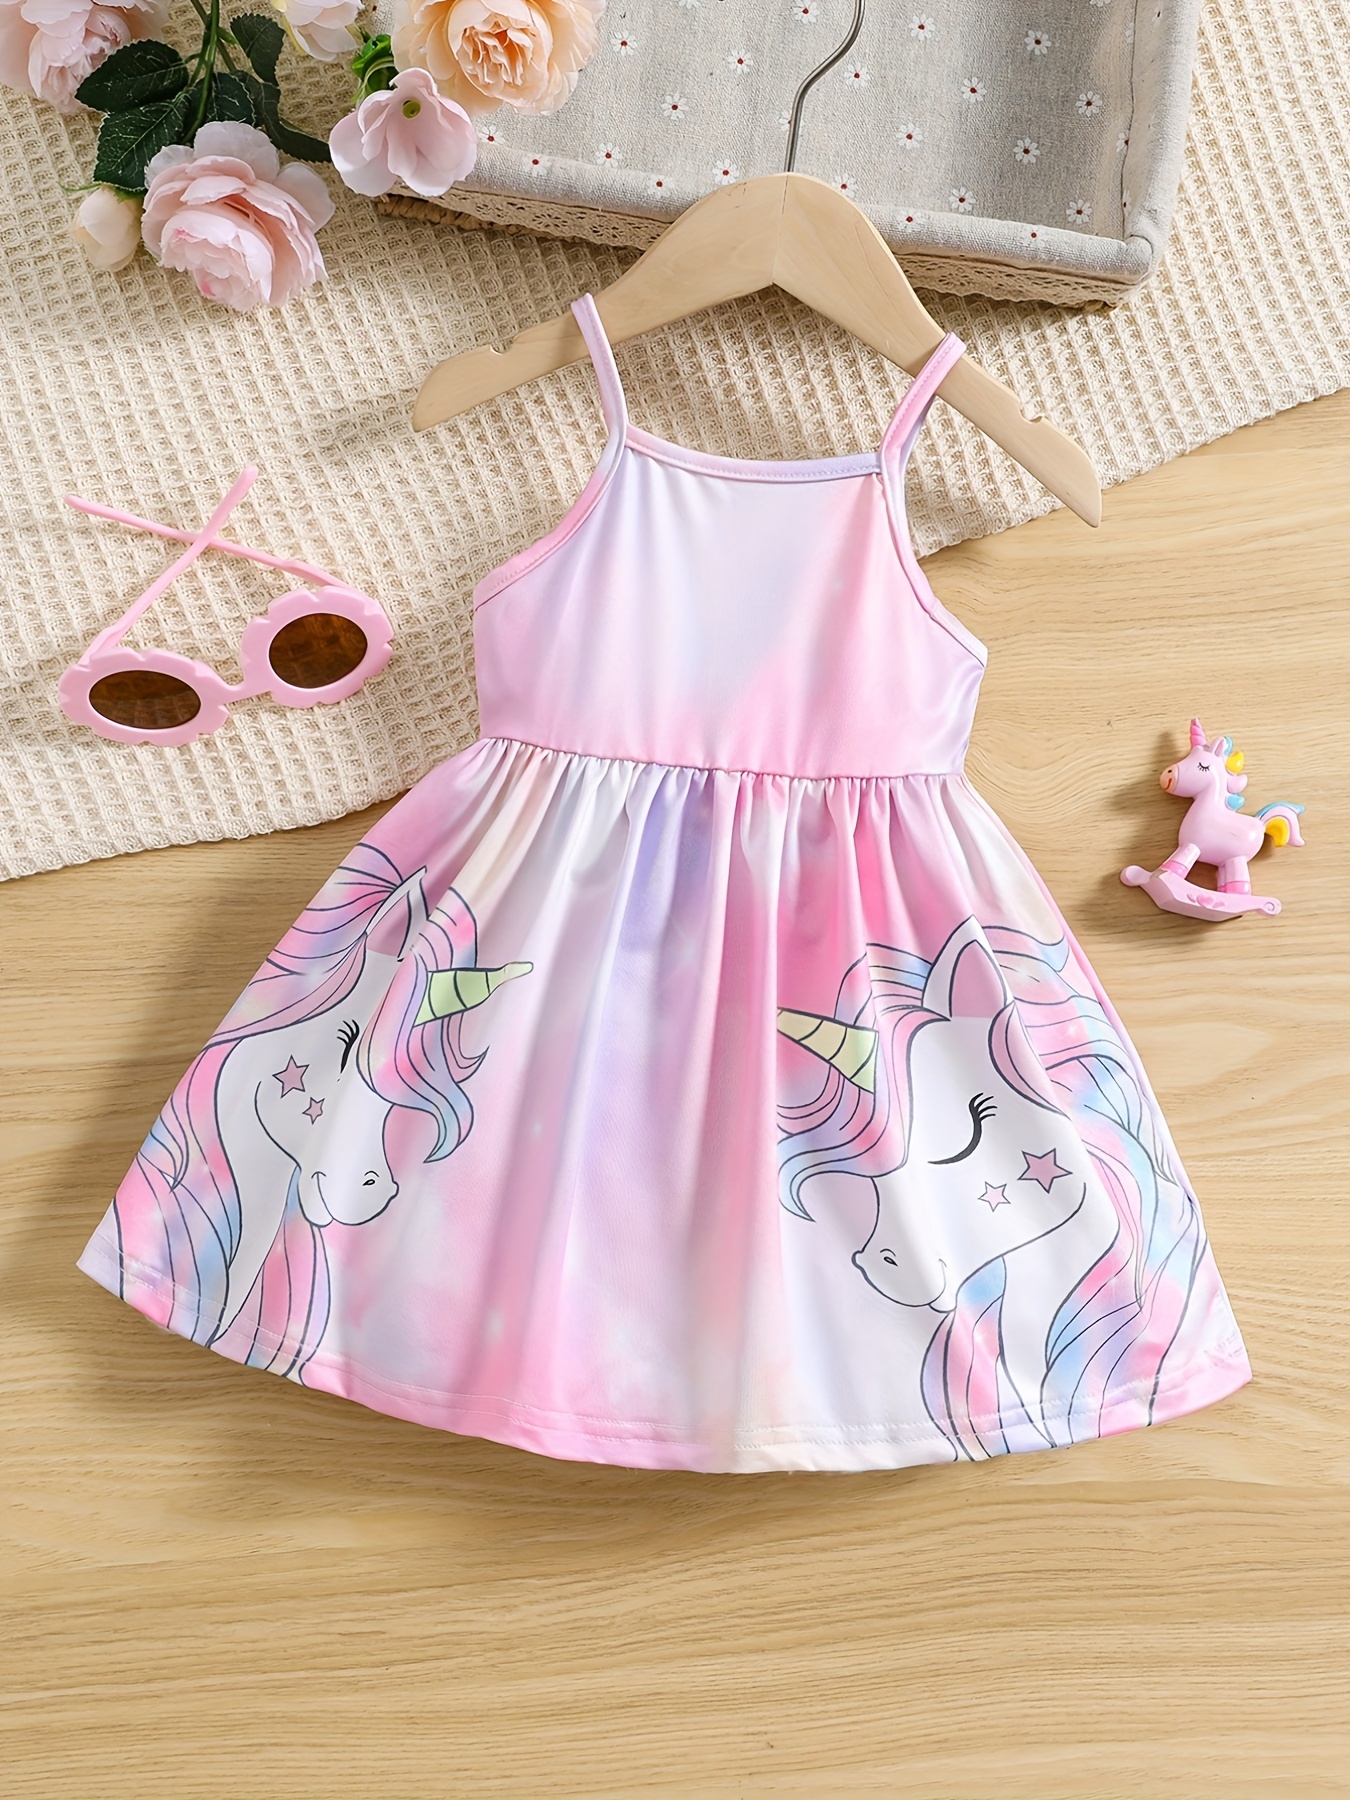 Adorable Summer Unicorn Dress For Your Little Princess - Perfect For Baby  Girls!